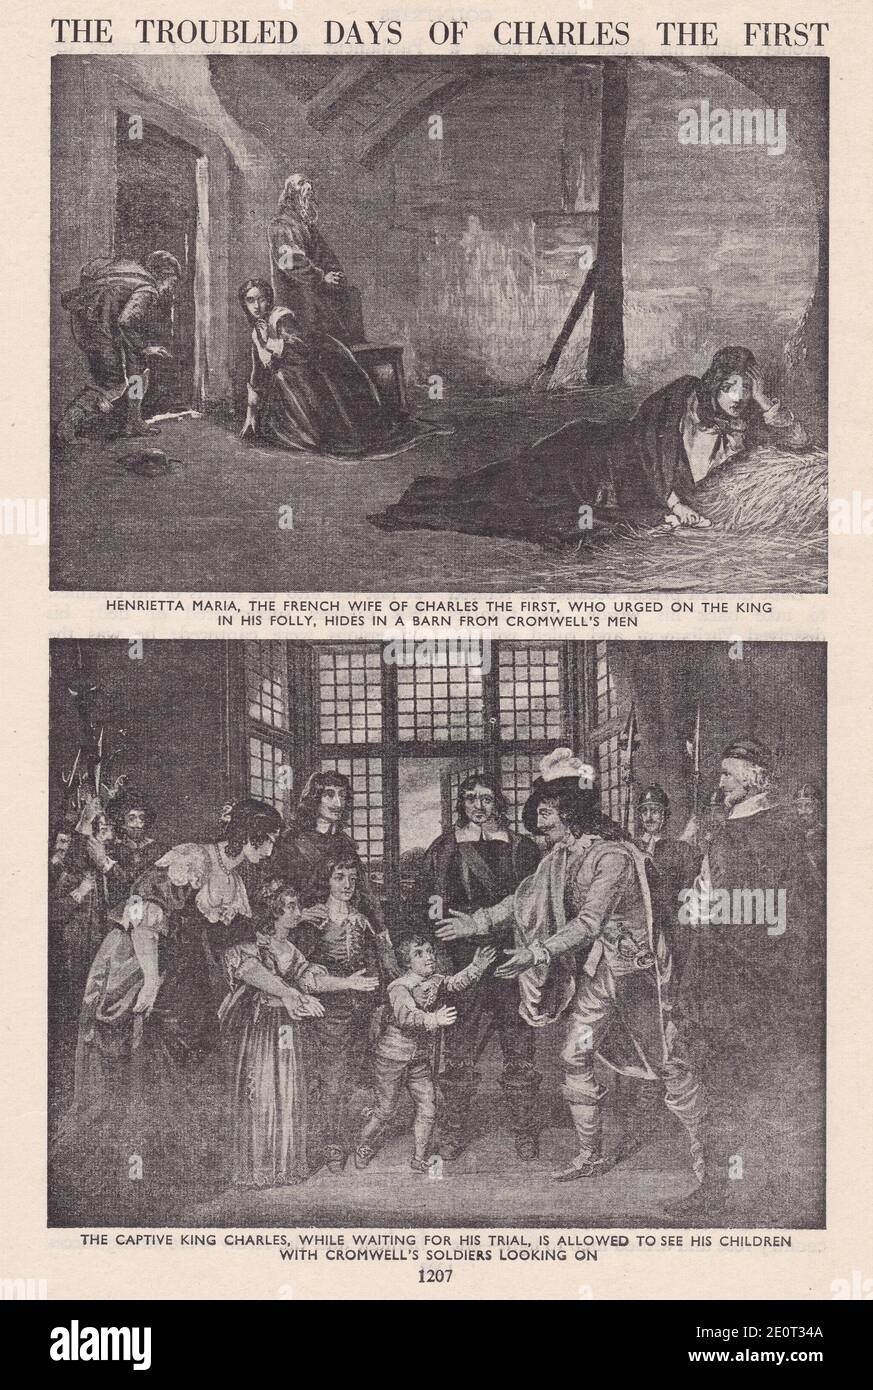 The troubled days of Charles the First - Henrietta Maria hiding in a barn from Cromwell's men / Allowed to see his children whilst awaiting his trial. Stock Photo